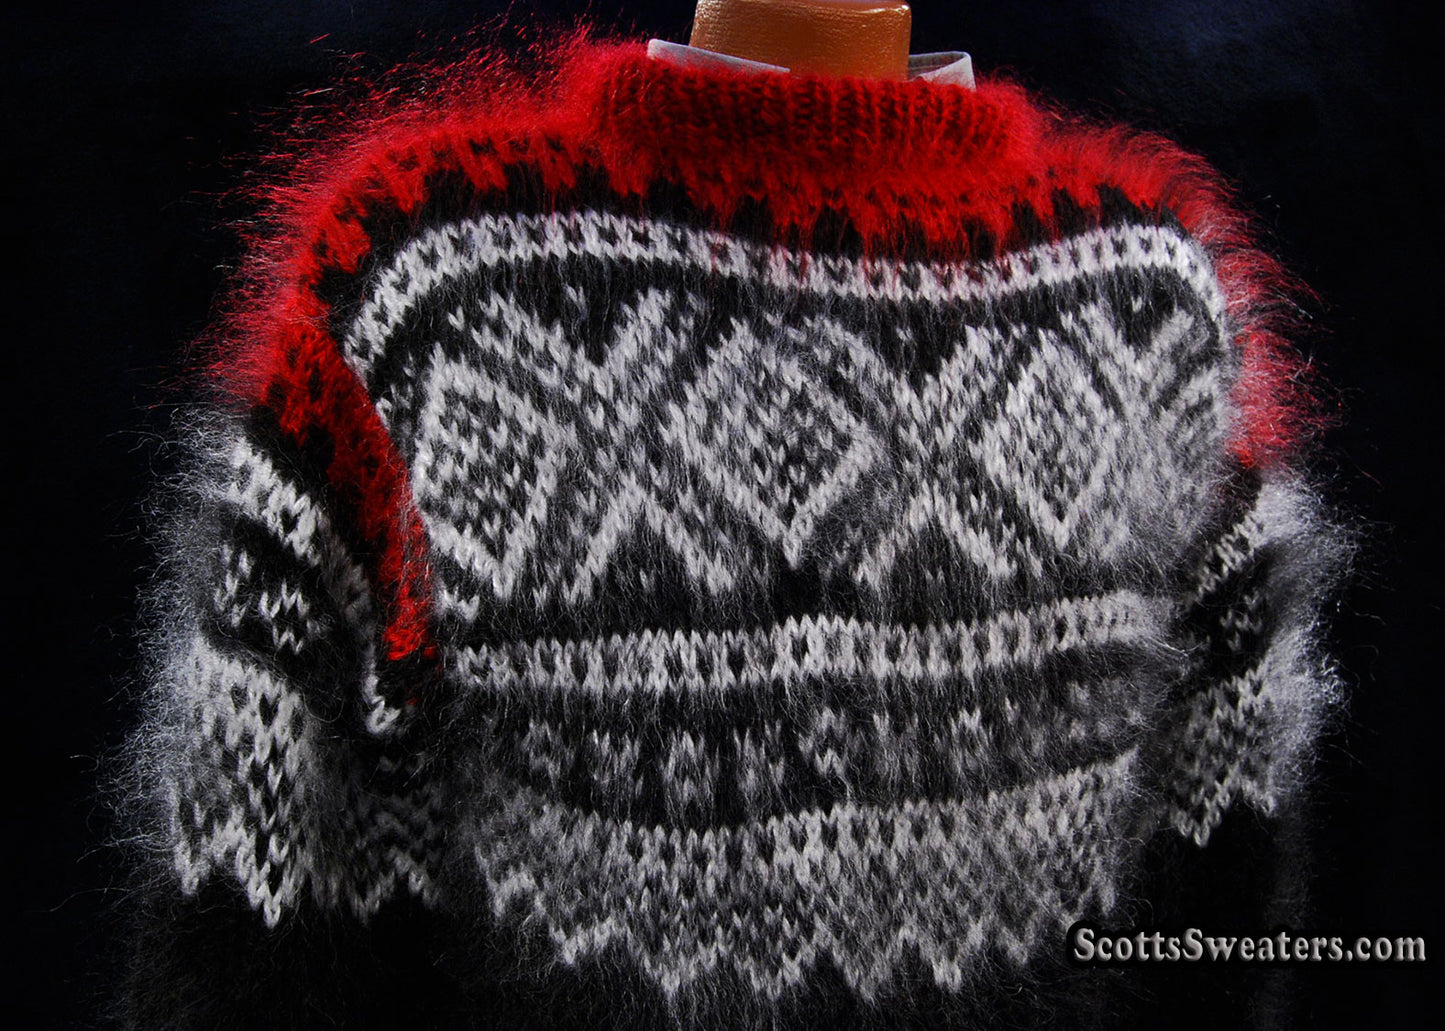 Men's Black Mohair Pullover Crewneck Sweater with Red and White Design [#700-038]